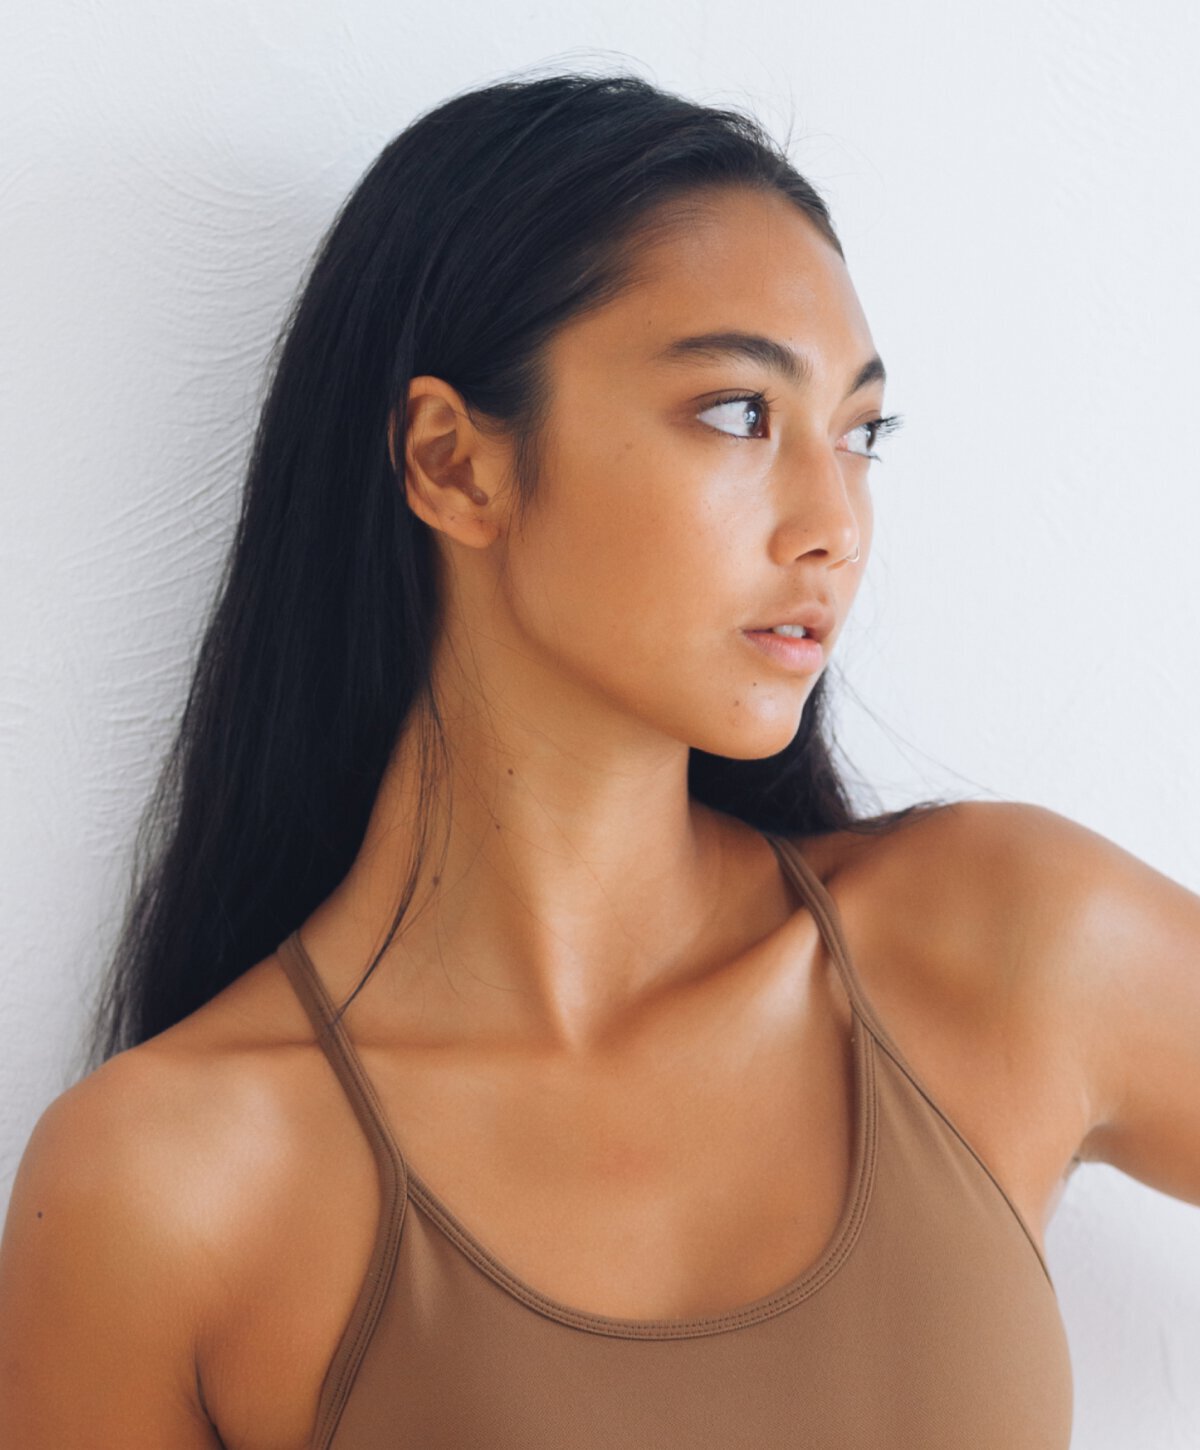 Ponte Vedra Beach Scar Revision model in a brown top